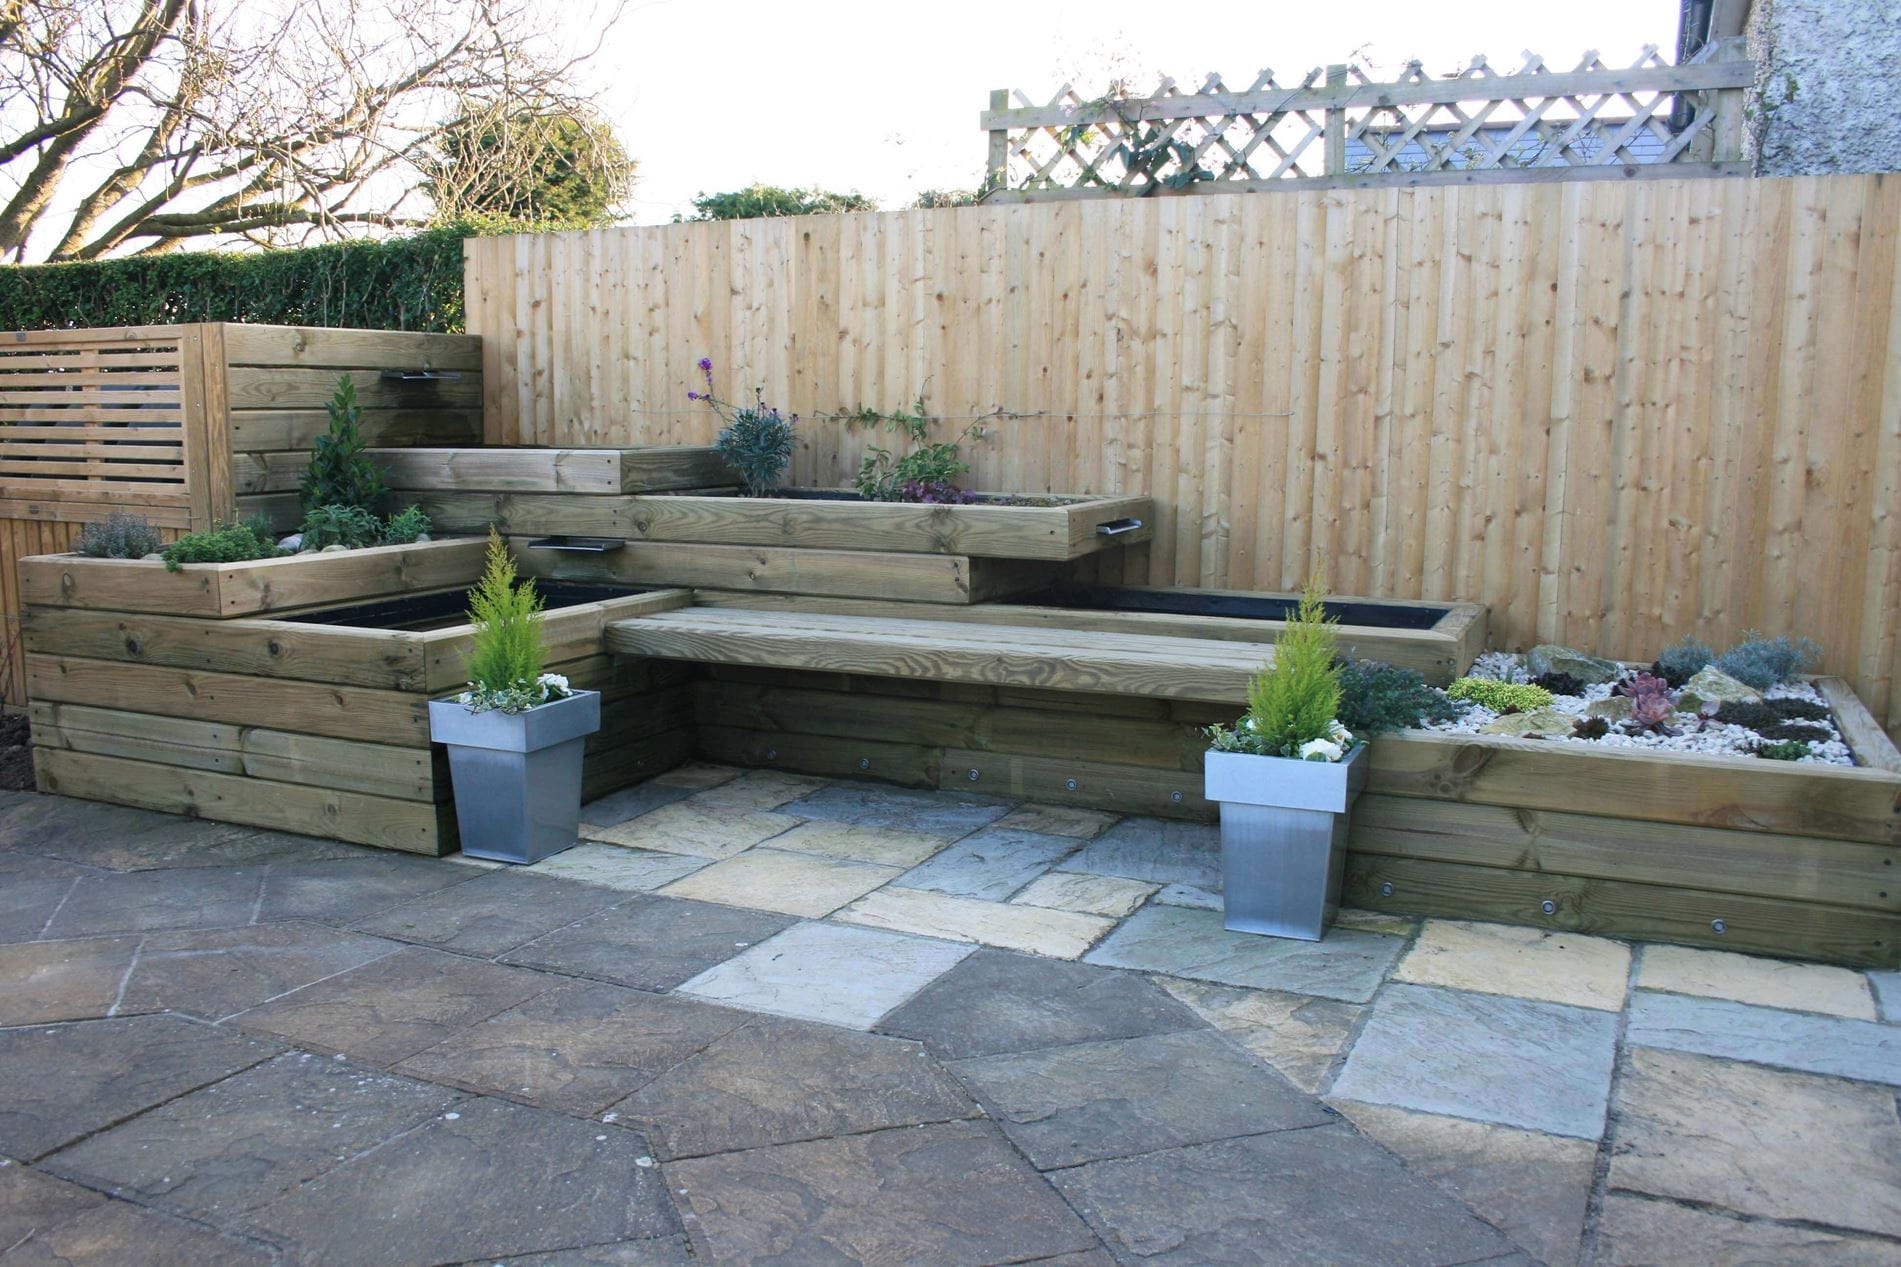 completed garden feature using landscape timbers